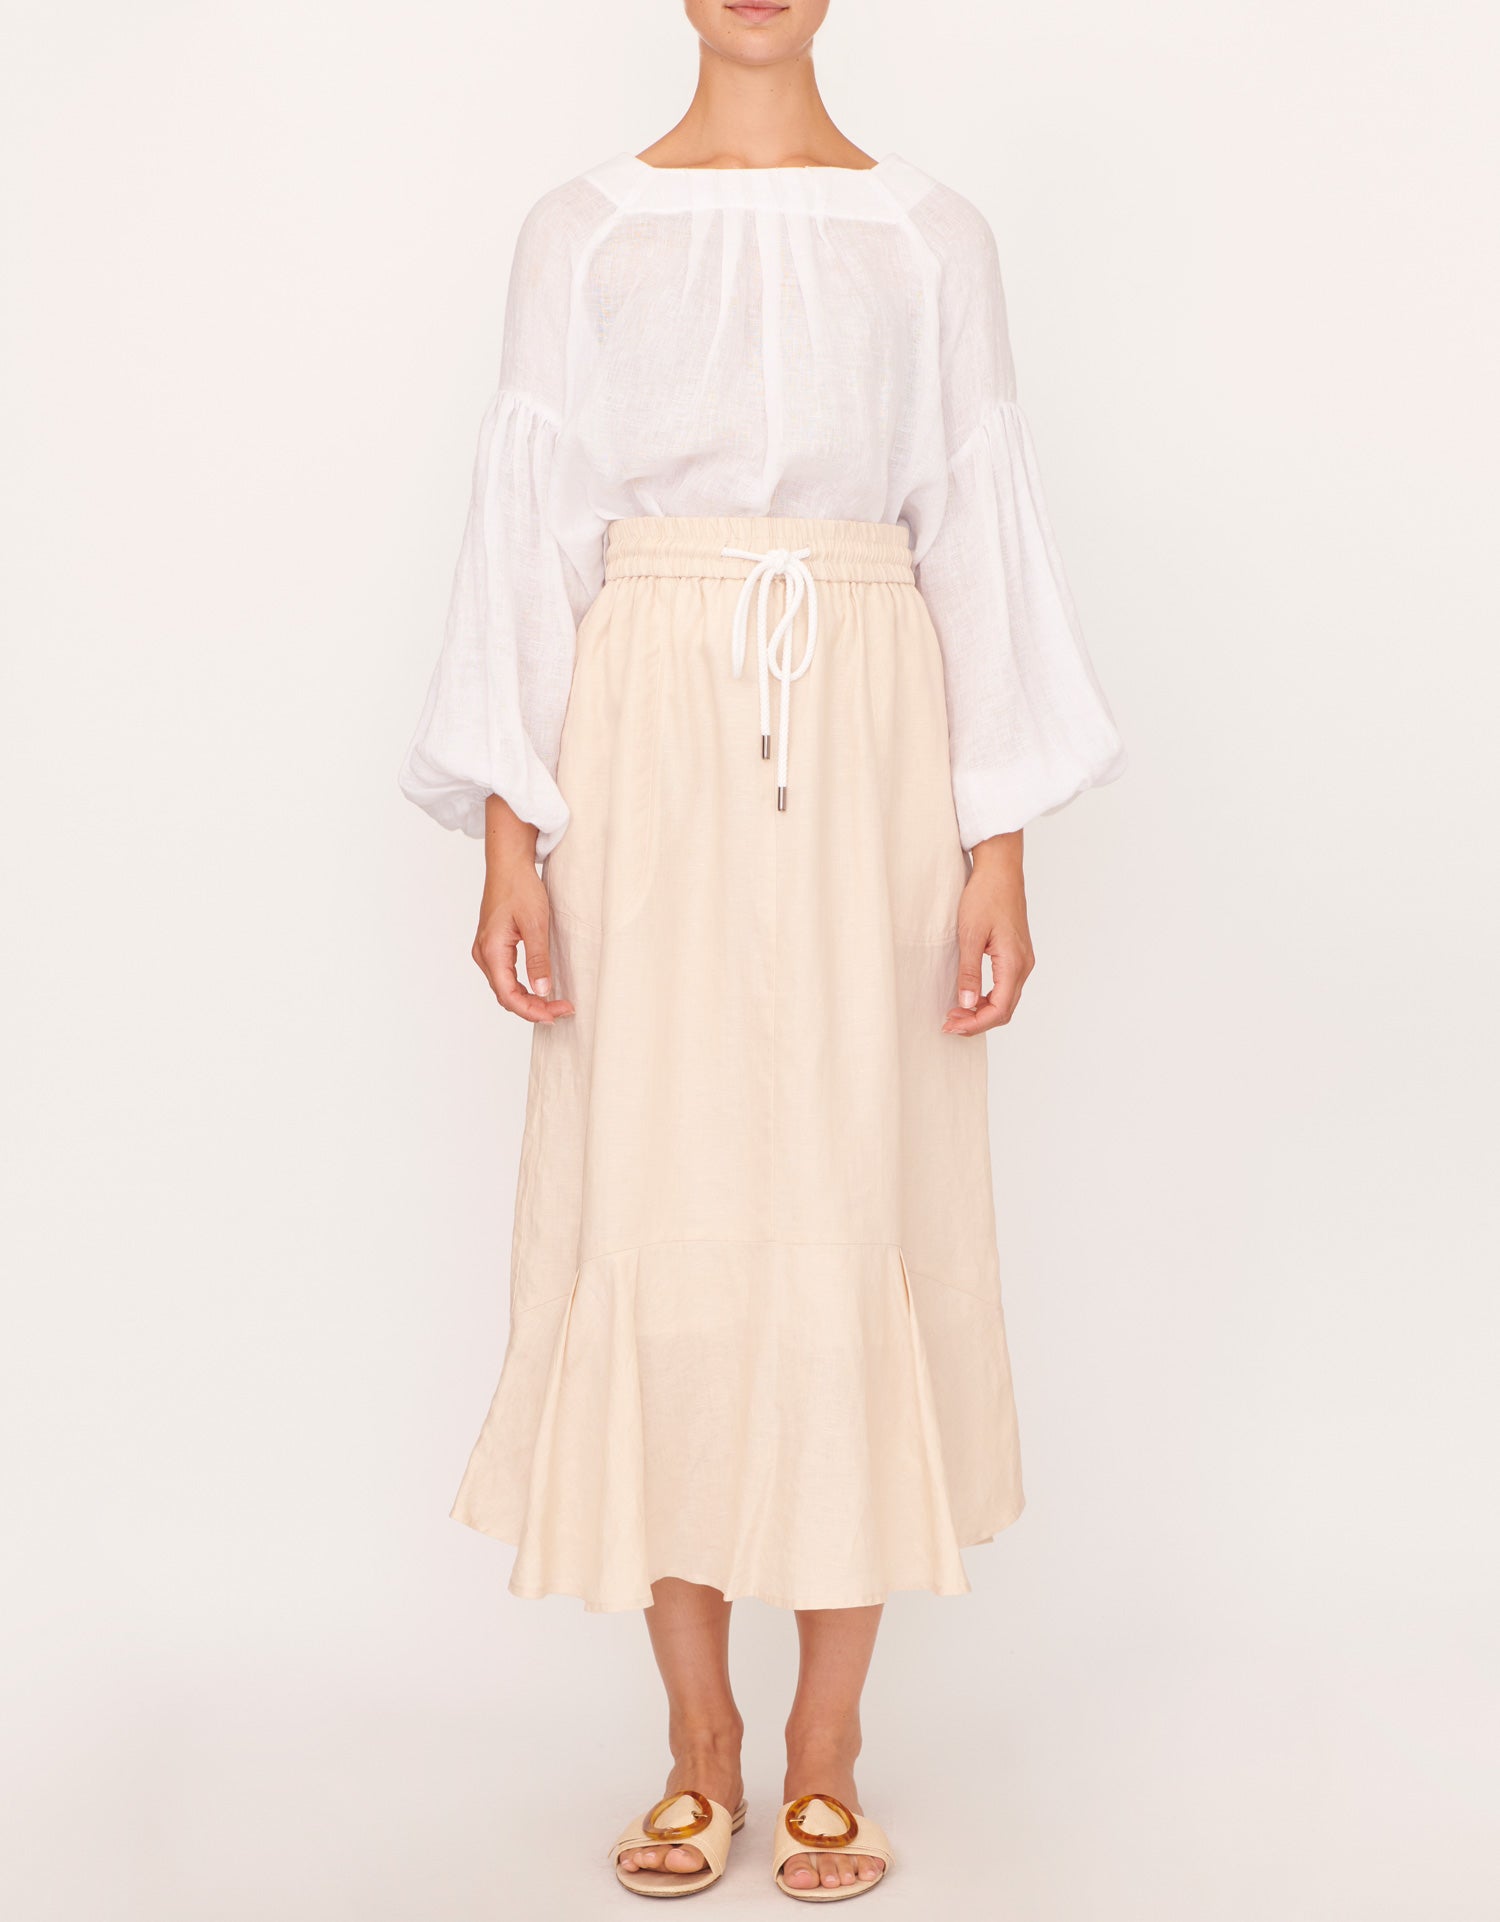 The Beech Linen Drawstring Skirt by Apartment Clothing